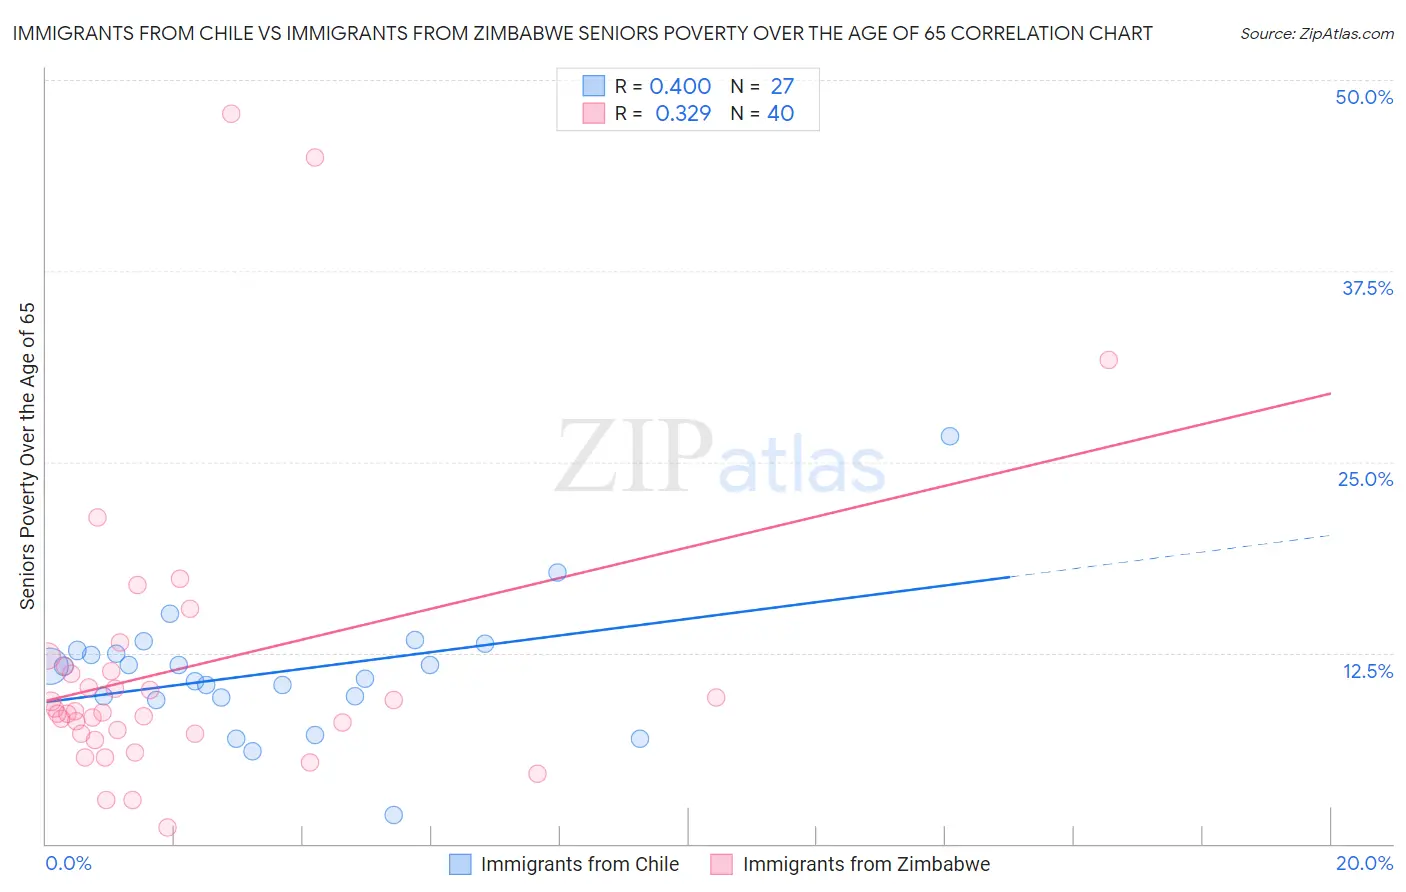 Immigrants from Chile vs Immigrants from Zimbabwe Seniors Poverty Over the Age of 65